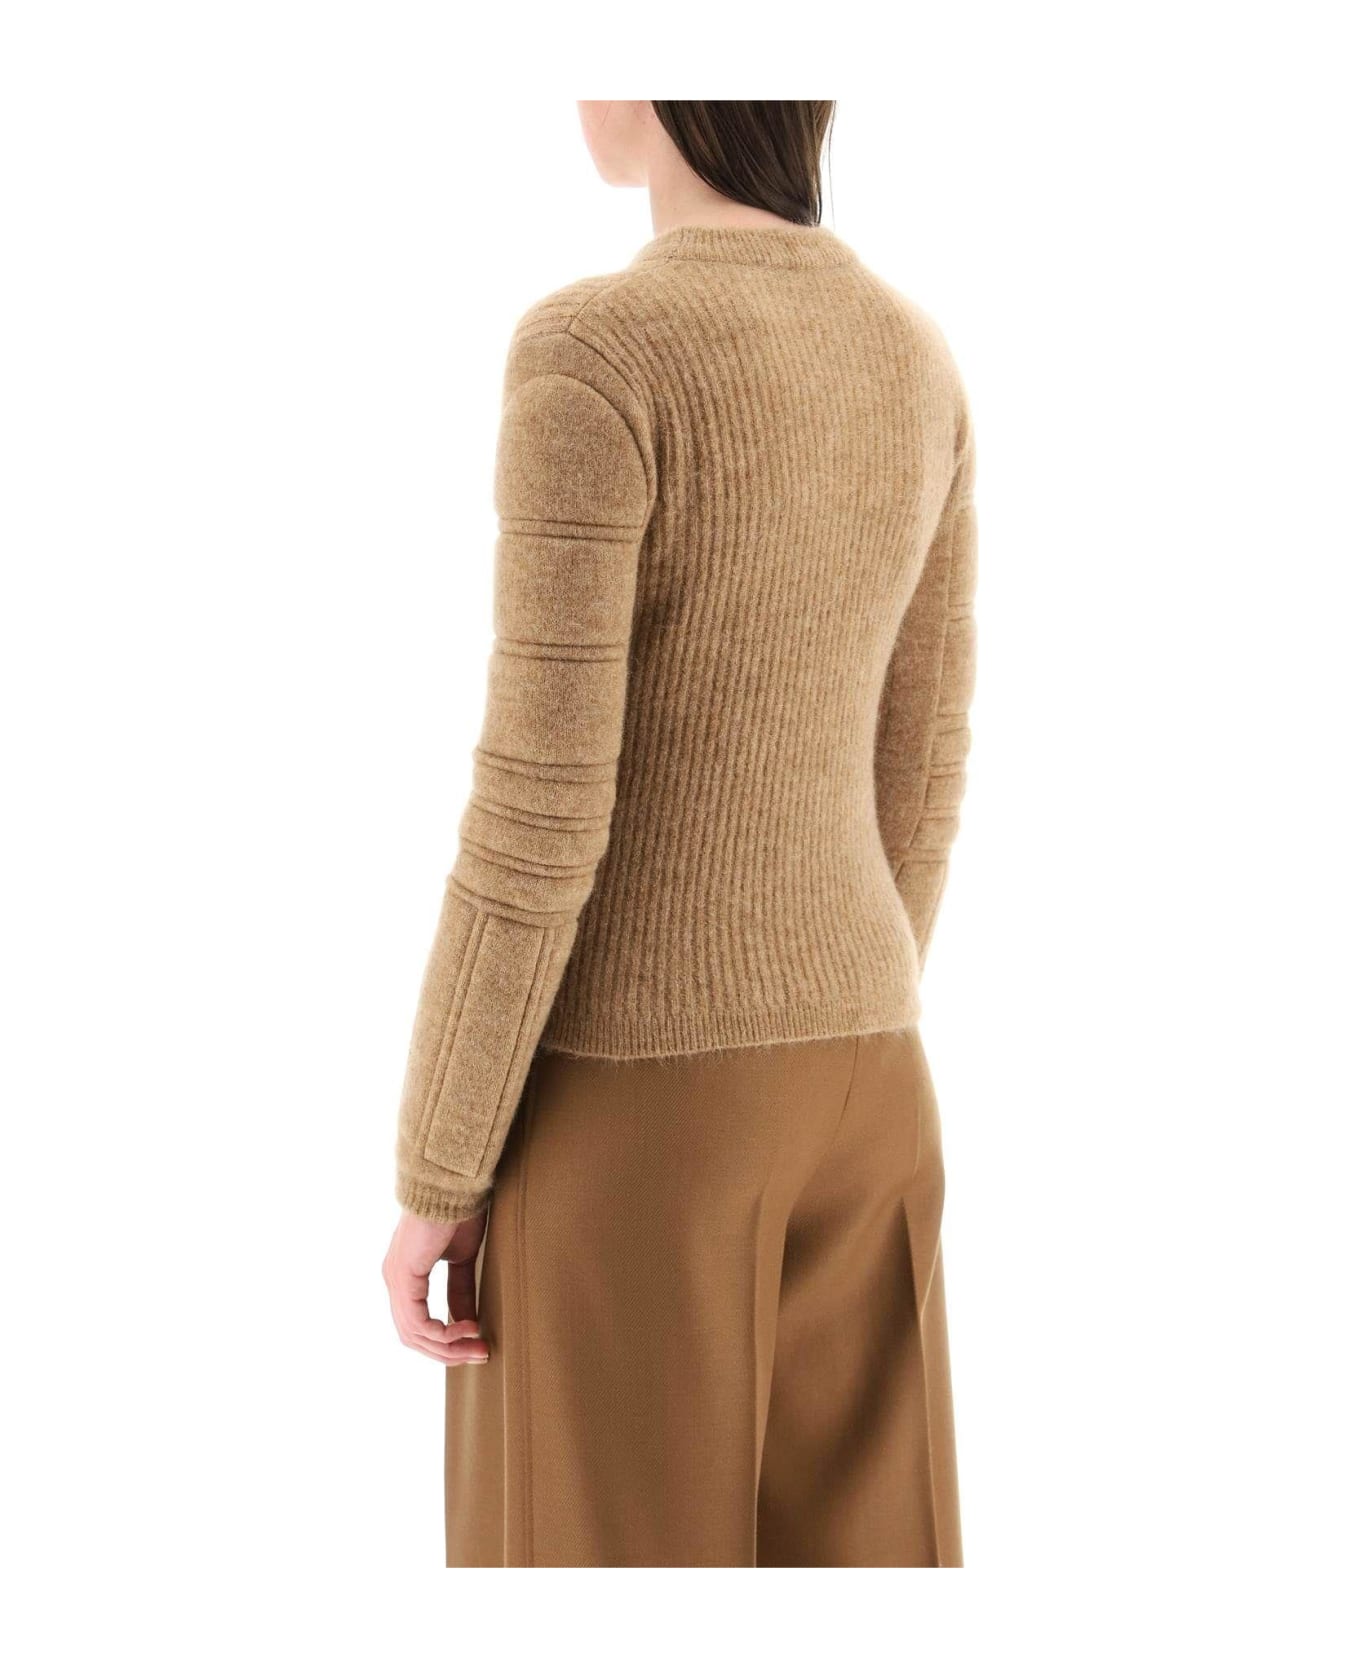 Max Mara 'smirne' Sweater In Wool And Mohair - BEIGE ニットウェア